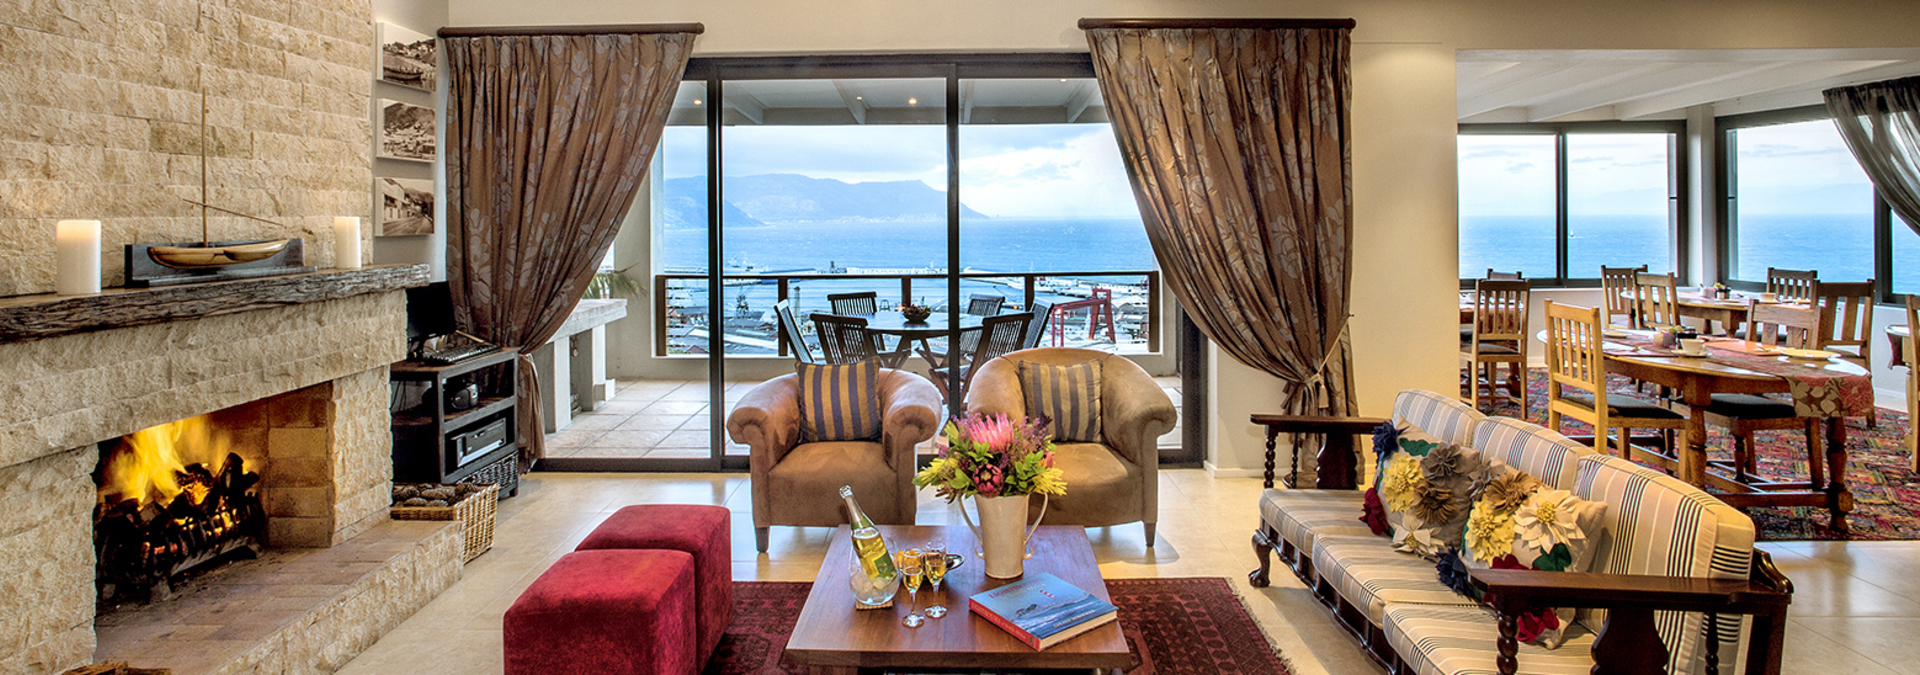 Lounge to dining rm with views, Mariner 04-Oct-2013 04-36-22 PM 1700x1131.jpg